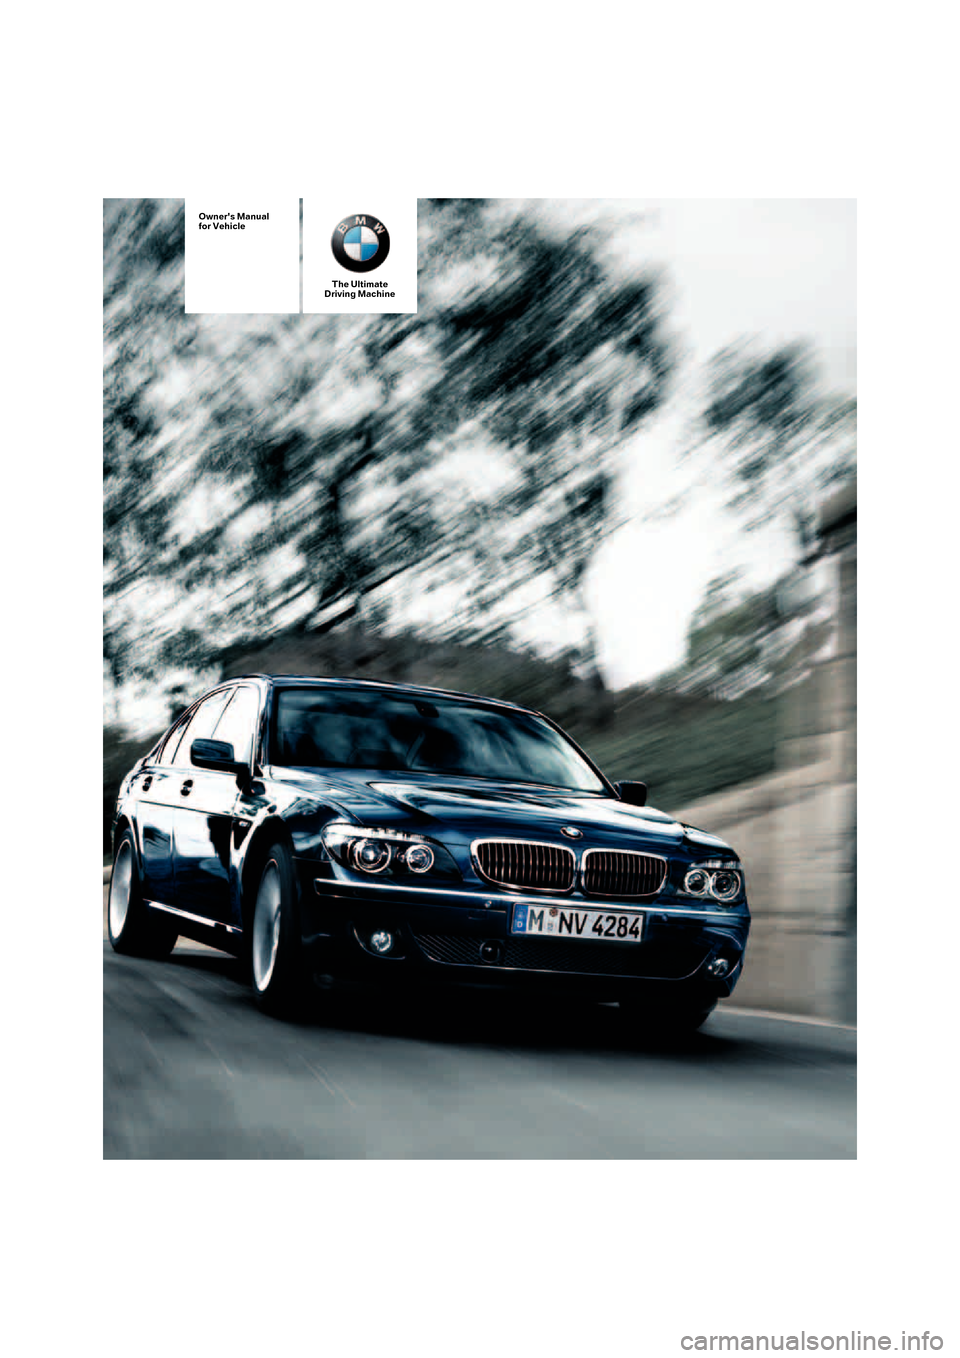 BMW 750LI 2007 E66 Owners Manual Owners Manual
for Vehicle
The Ultimate
Driving Machine 